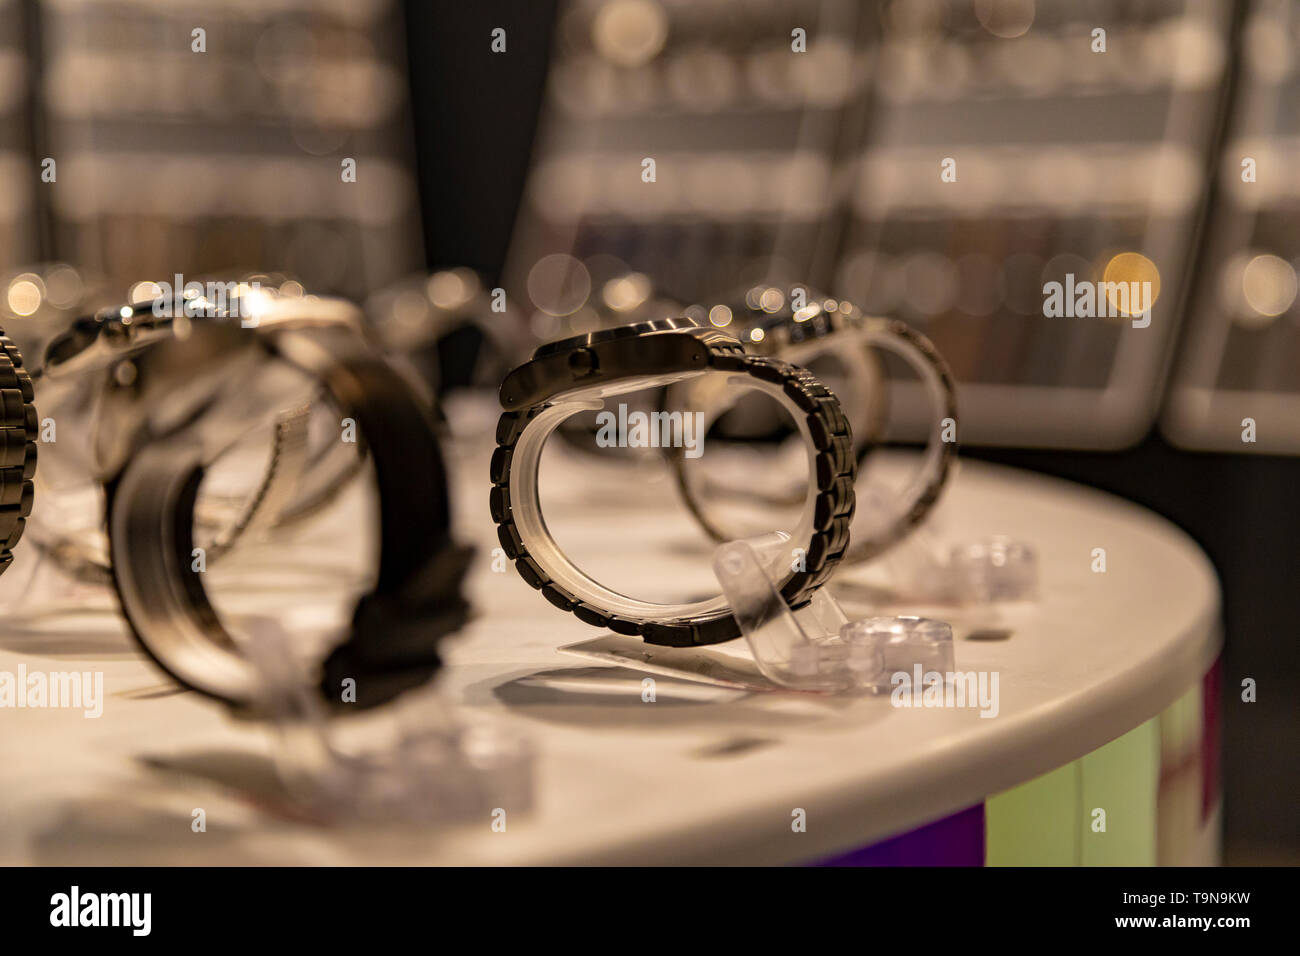 A display of luxury watches is seen in the window of a store in Vegas, Nevada, USA Stock Photo